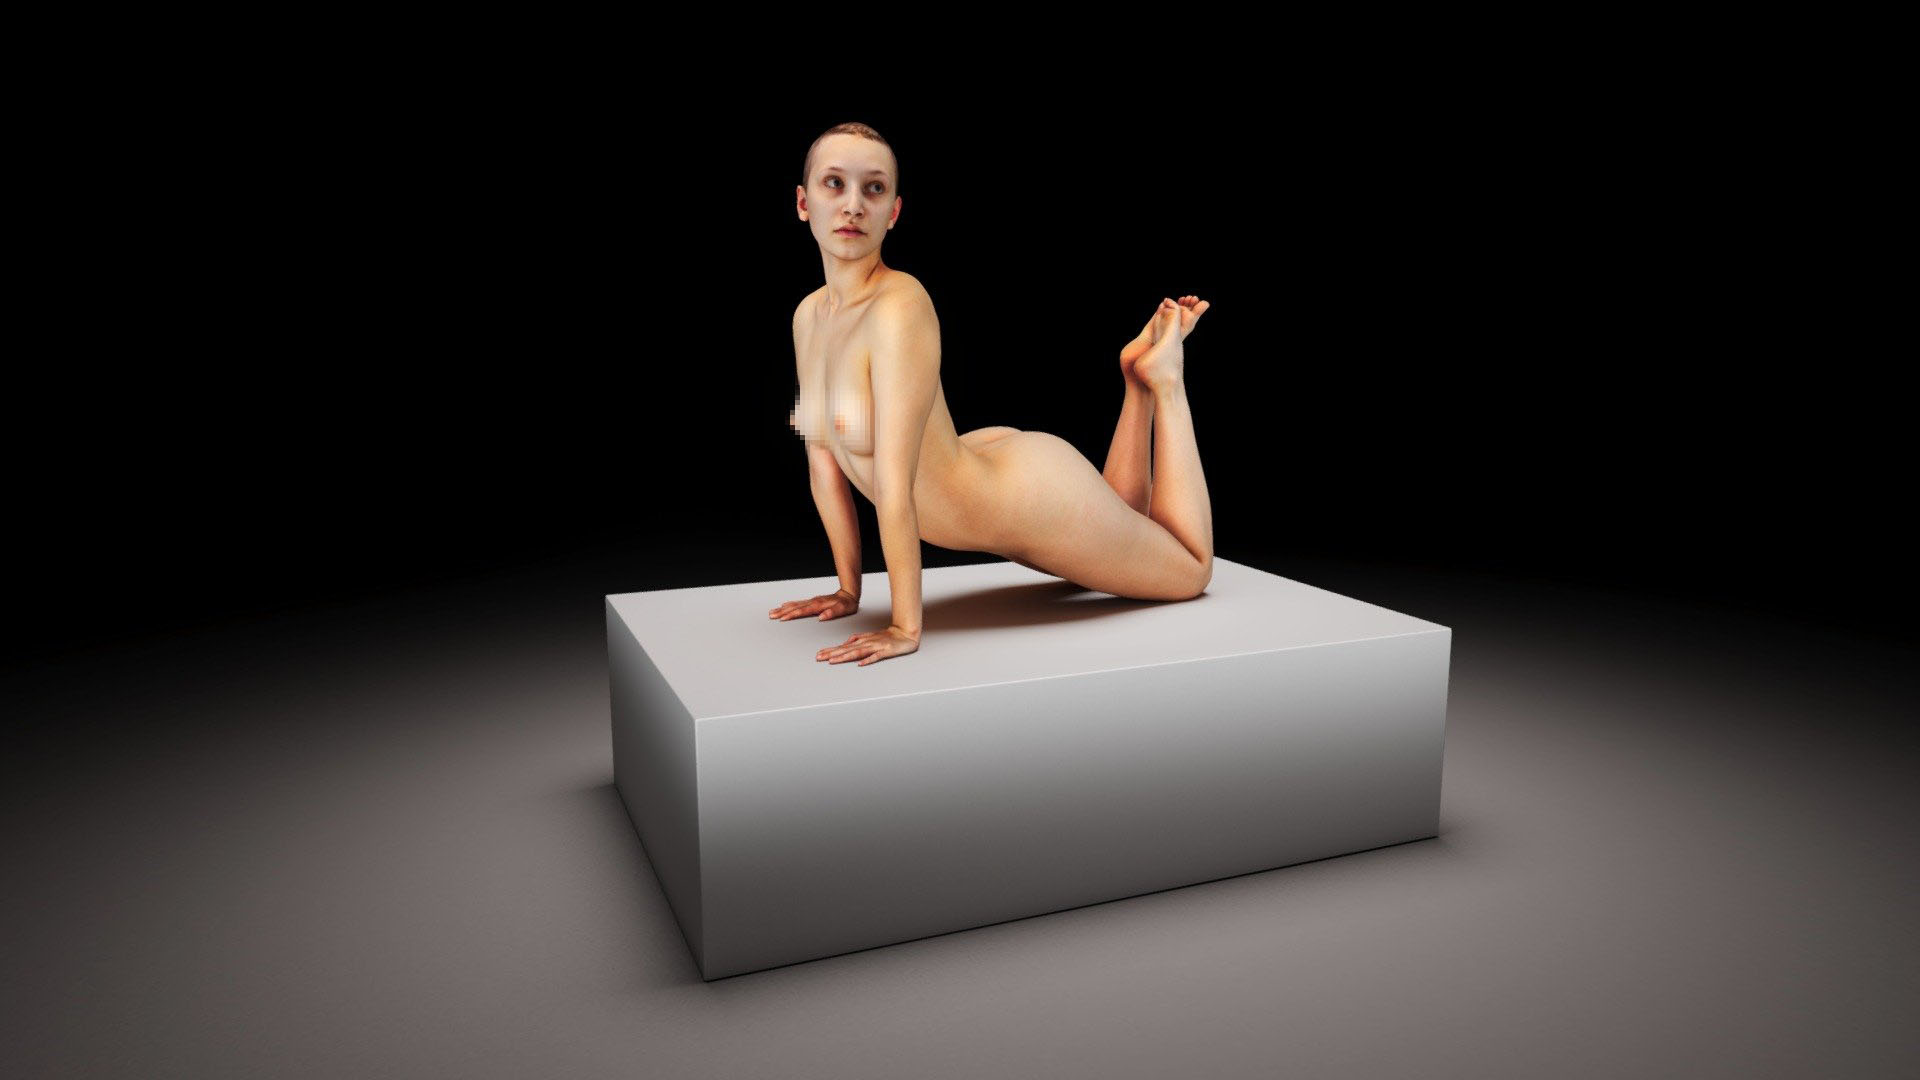 becky kneeling nude on a white block